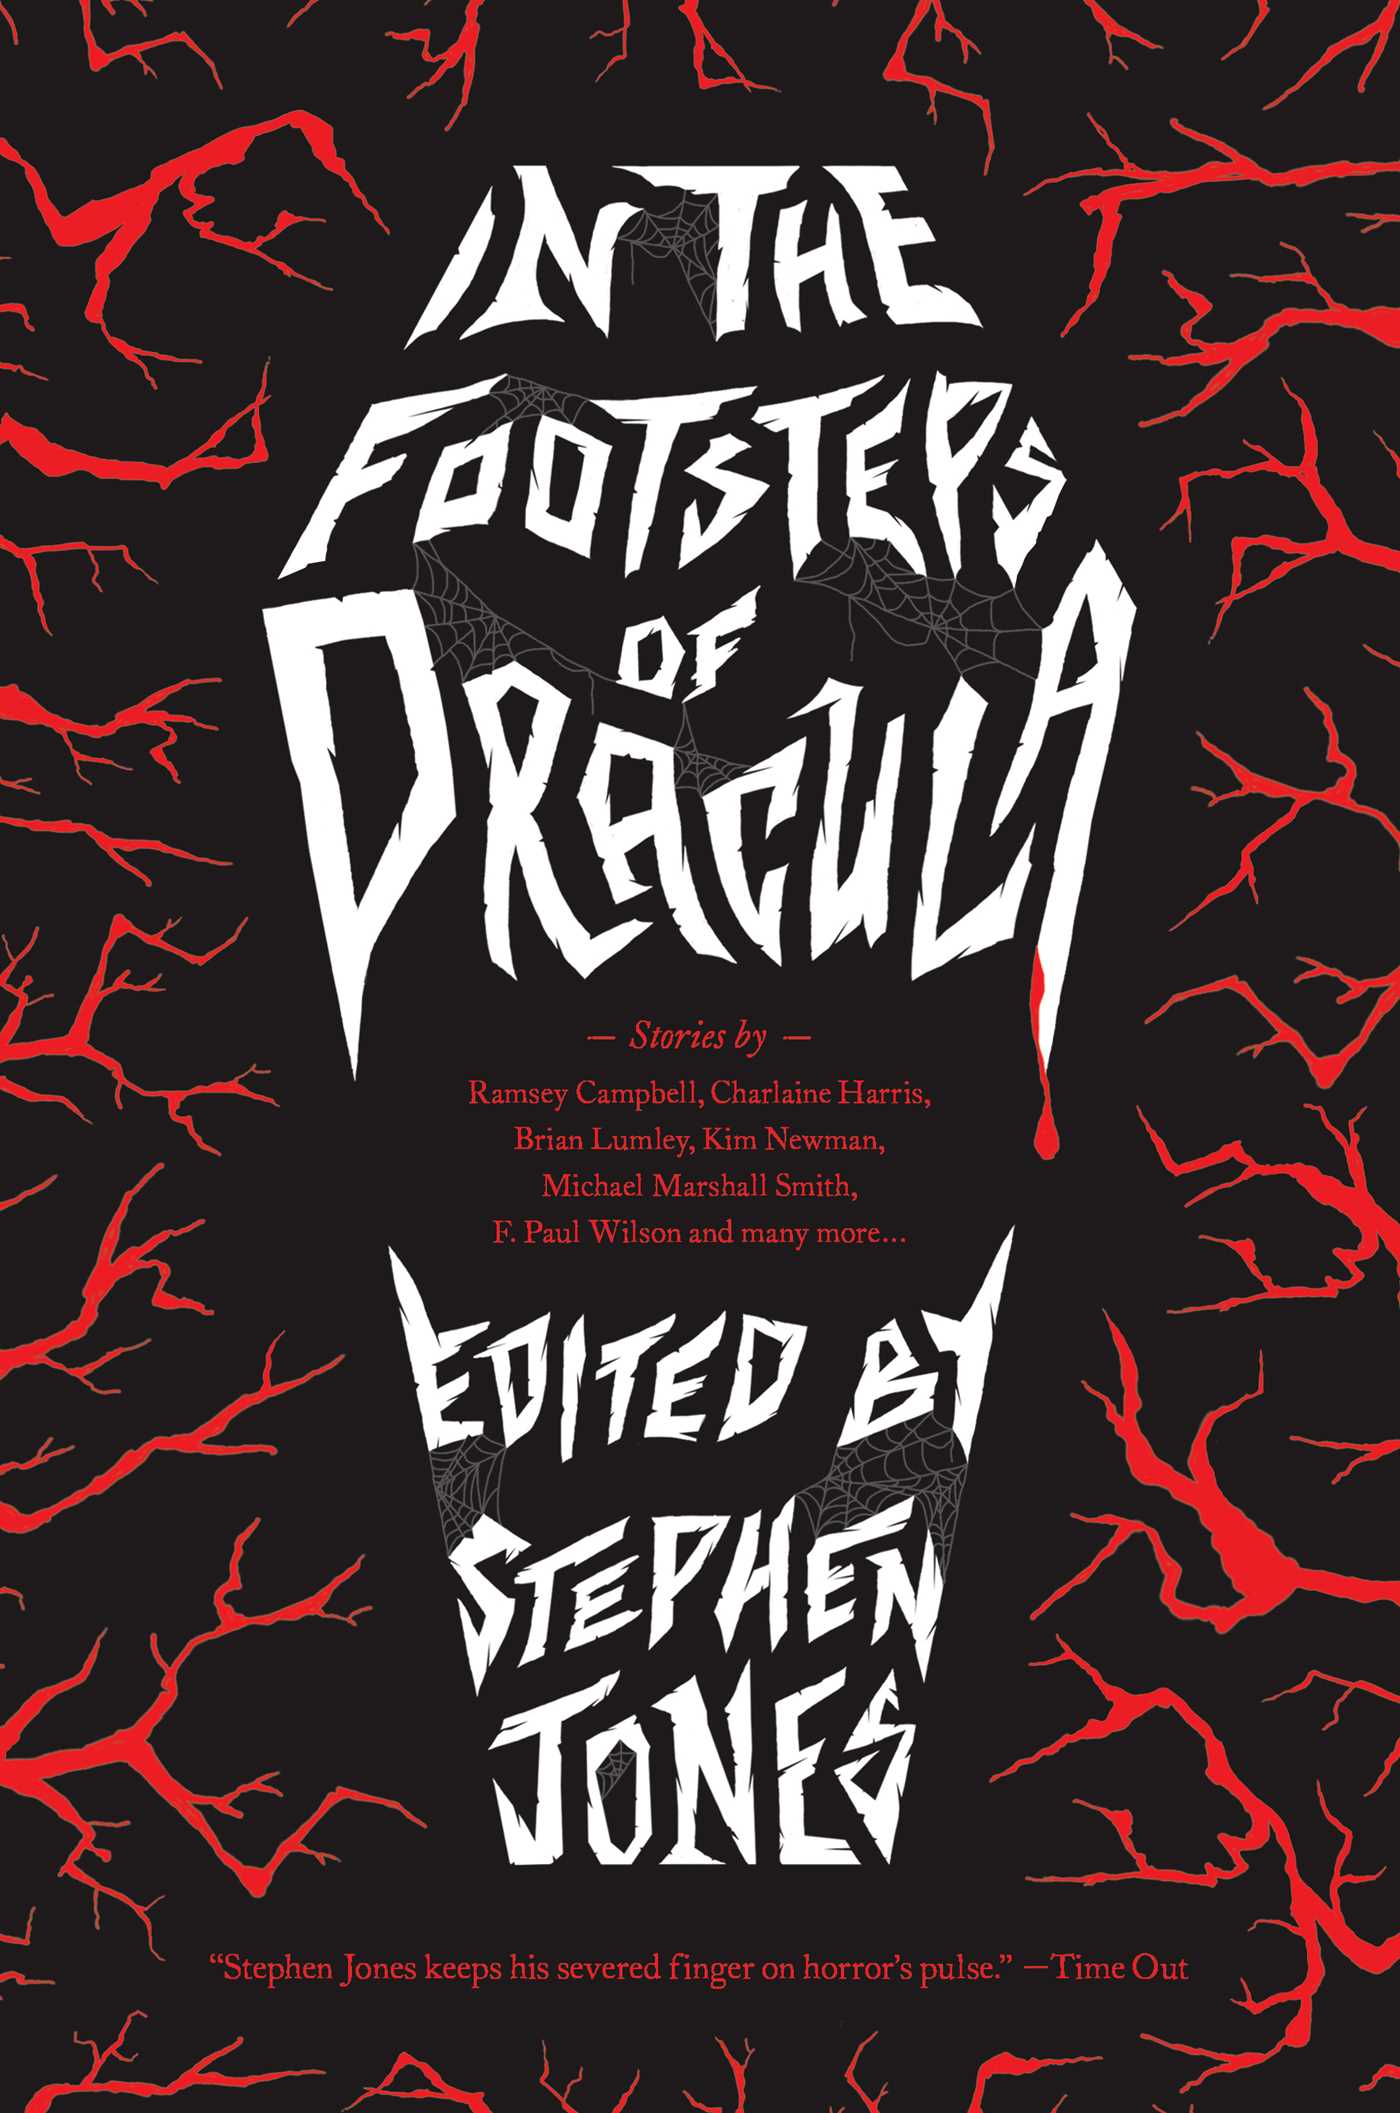 The Footsteps of Dracula